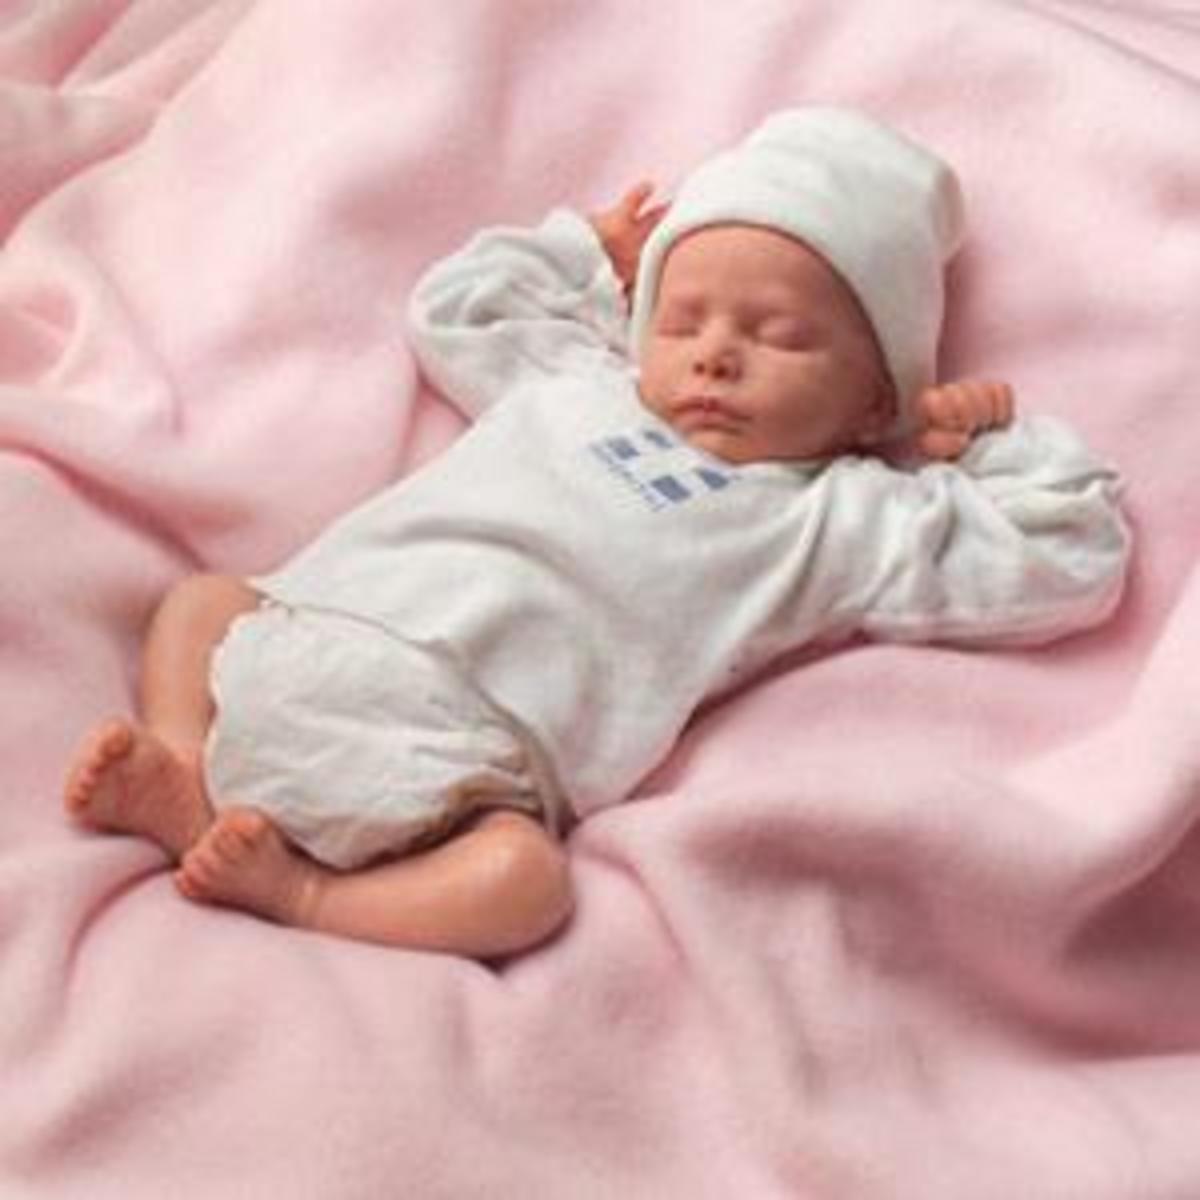 16 Impressive and Amazing Newborn Baby Dolls that Look Real!